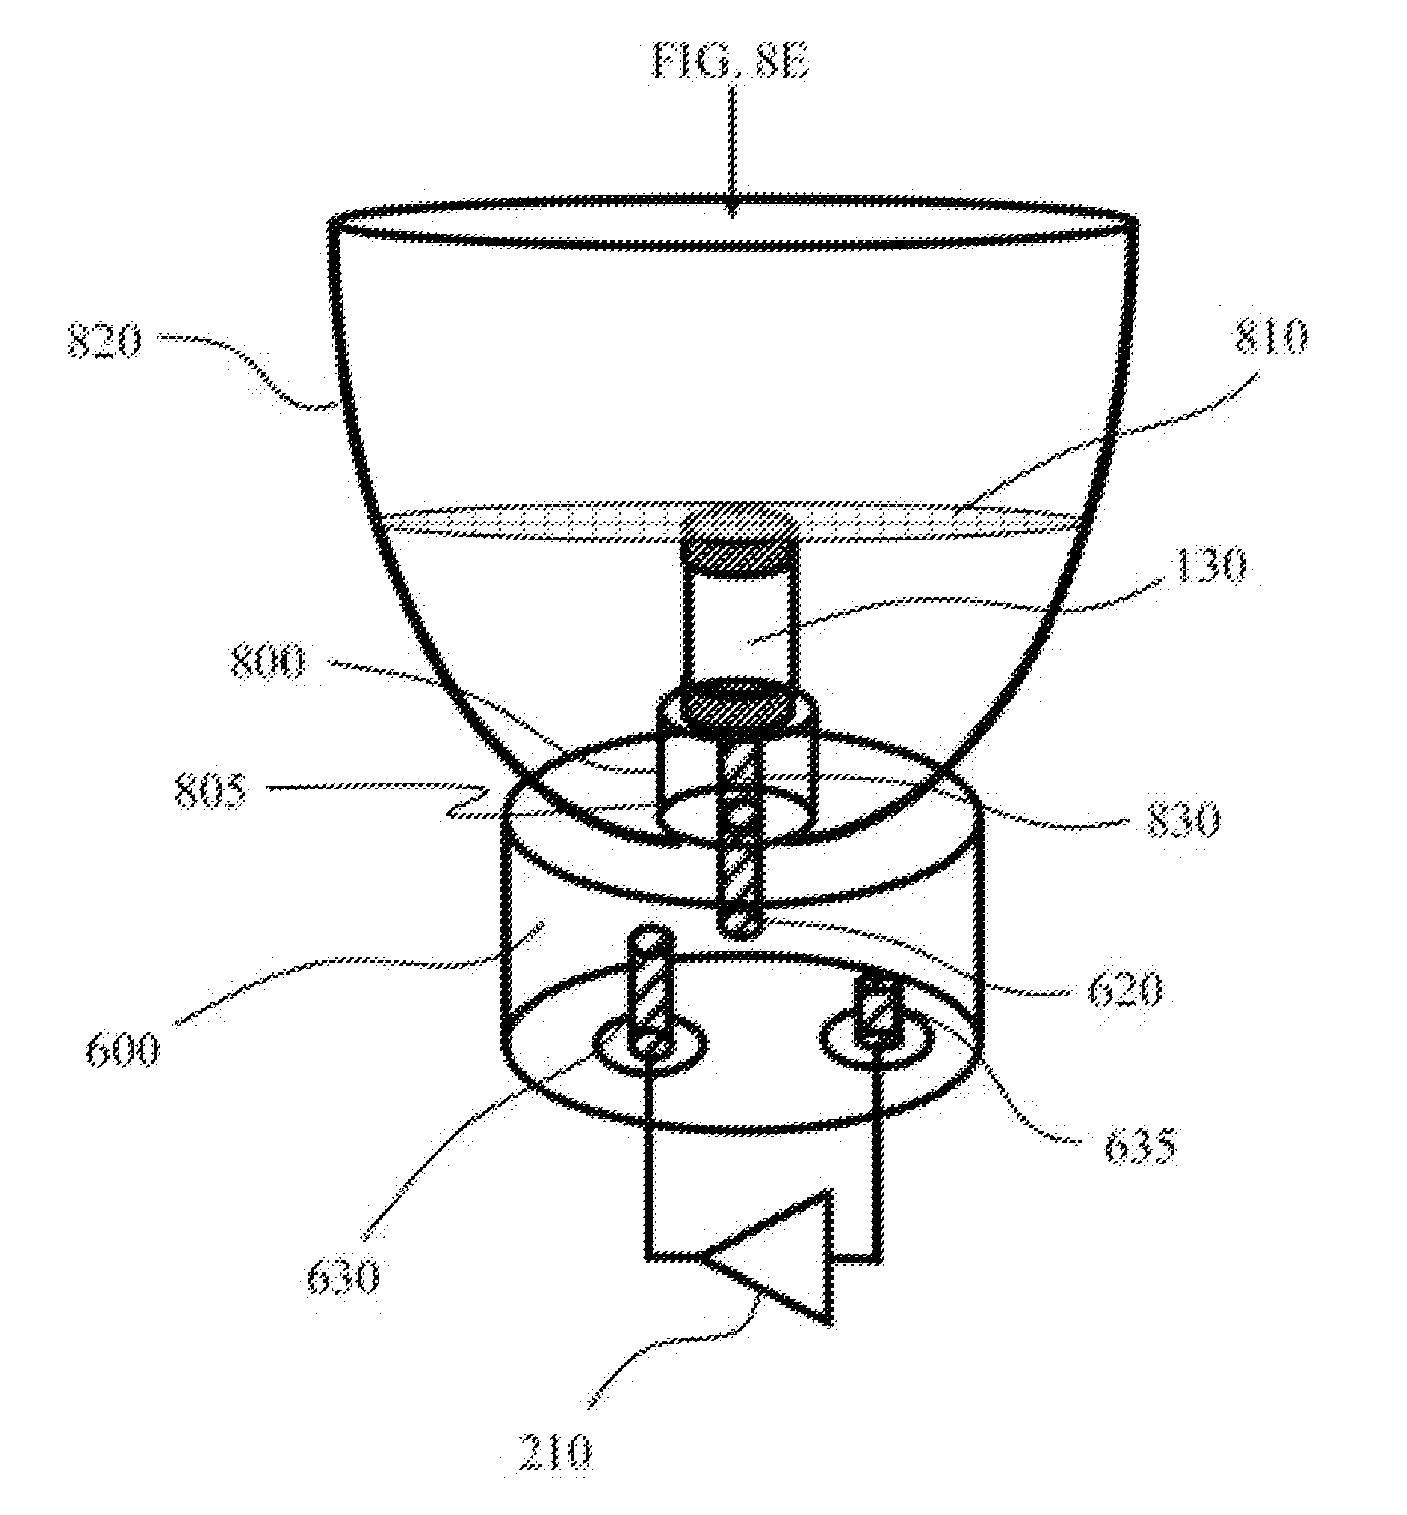 External resonator electrode-less plasma lamp and method of exciting with radio-frequency energy